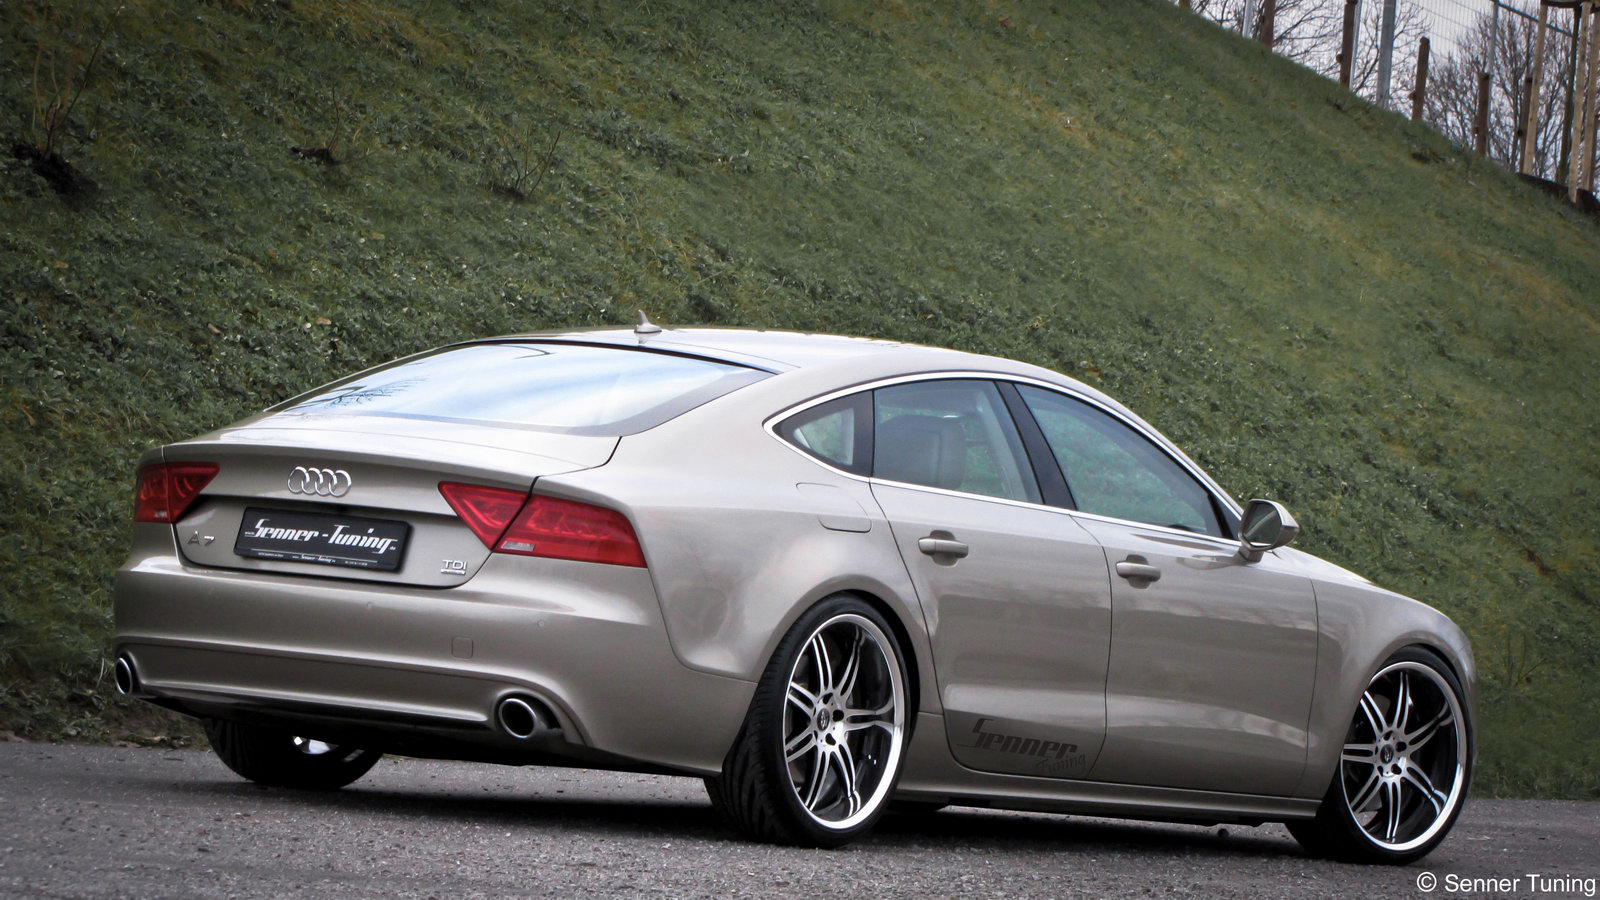 Wallpaper Audi A7 Sportback Gets Tuned By Senner